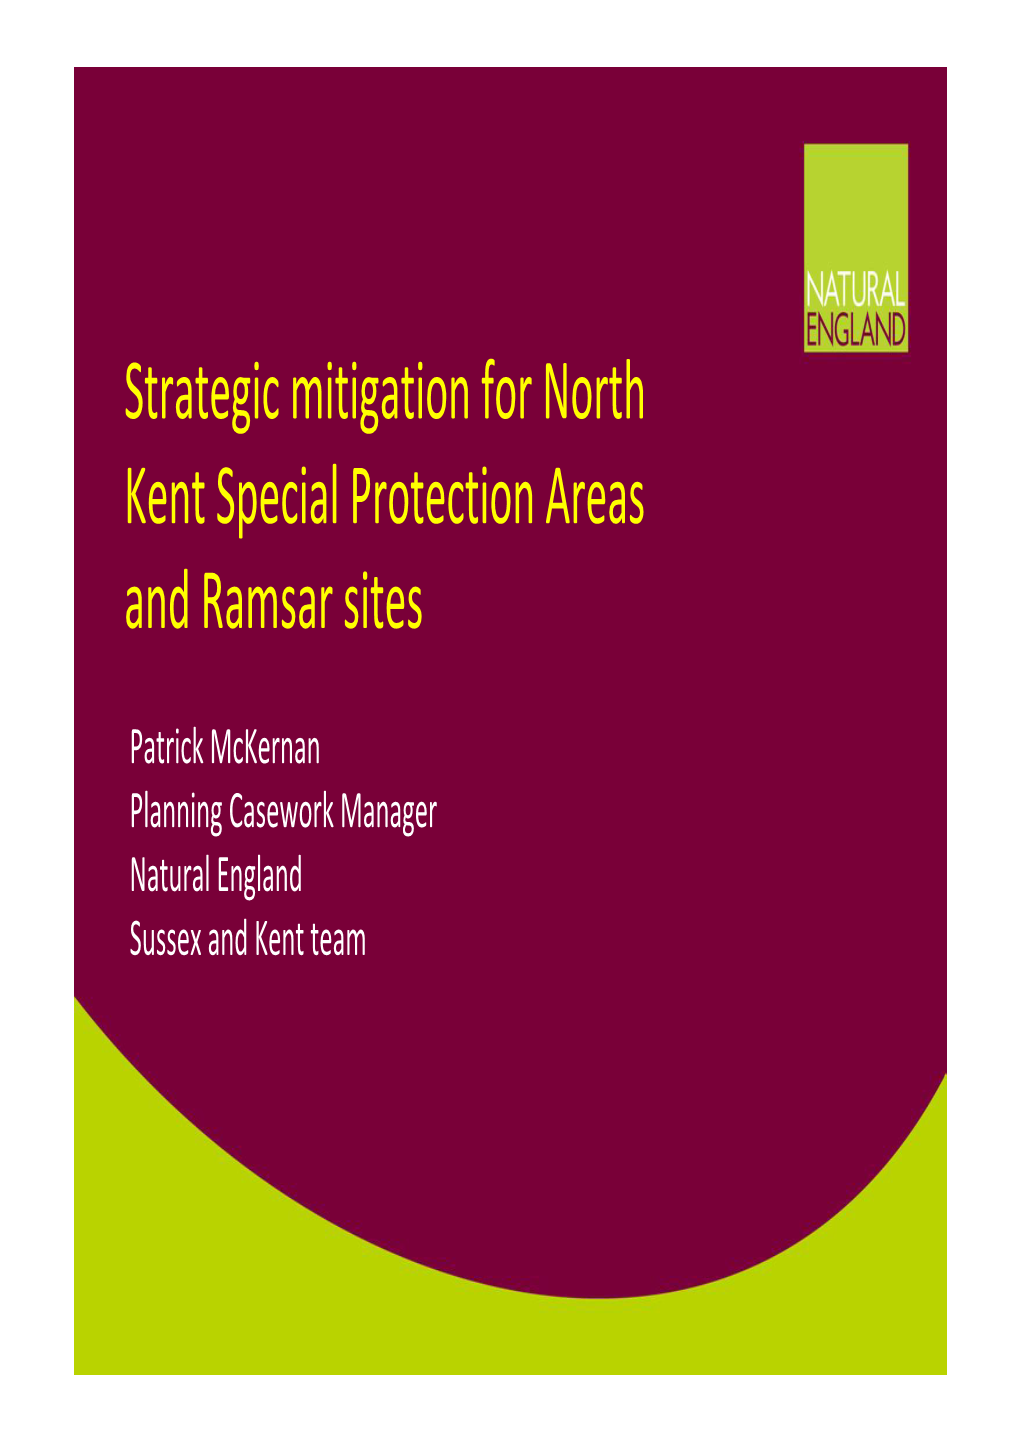 Strategic Mitigation for North Kent Special Protection Areas and Ramsar Sites